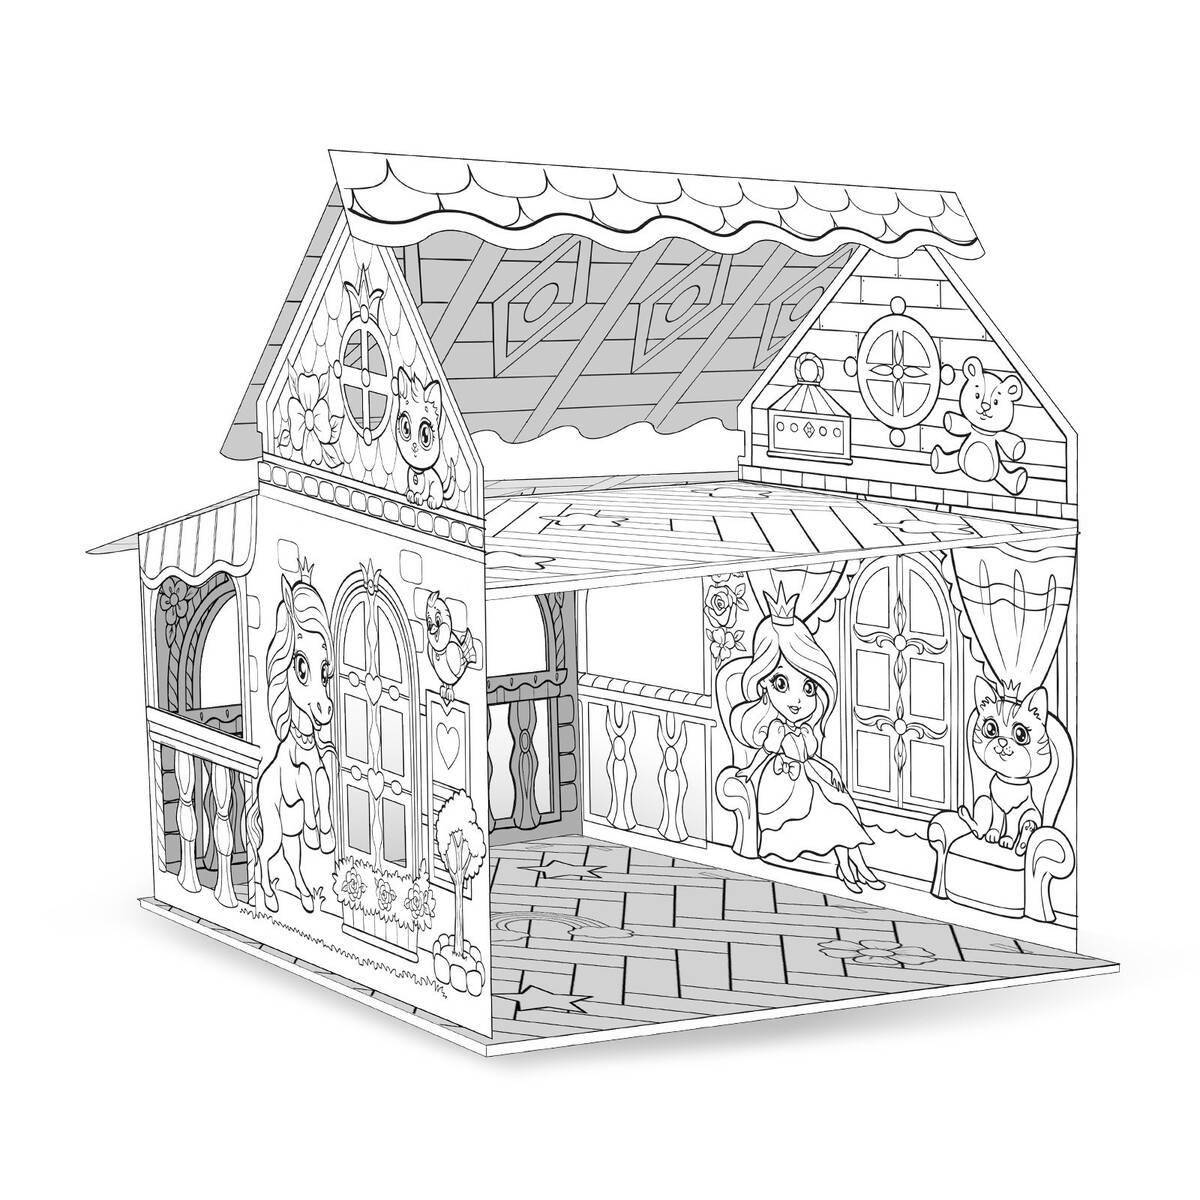 Coloring book glowing house for dolls